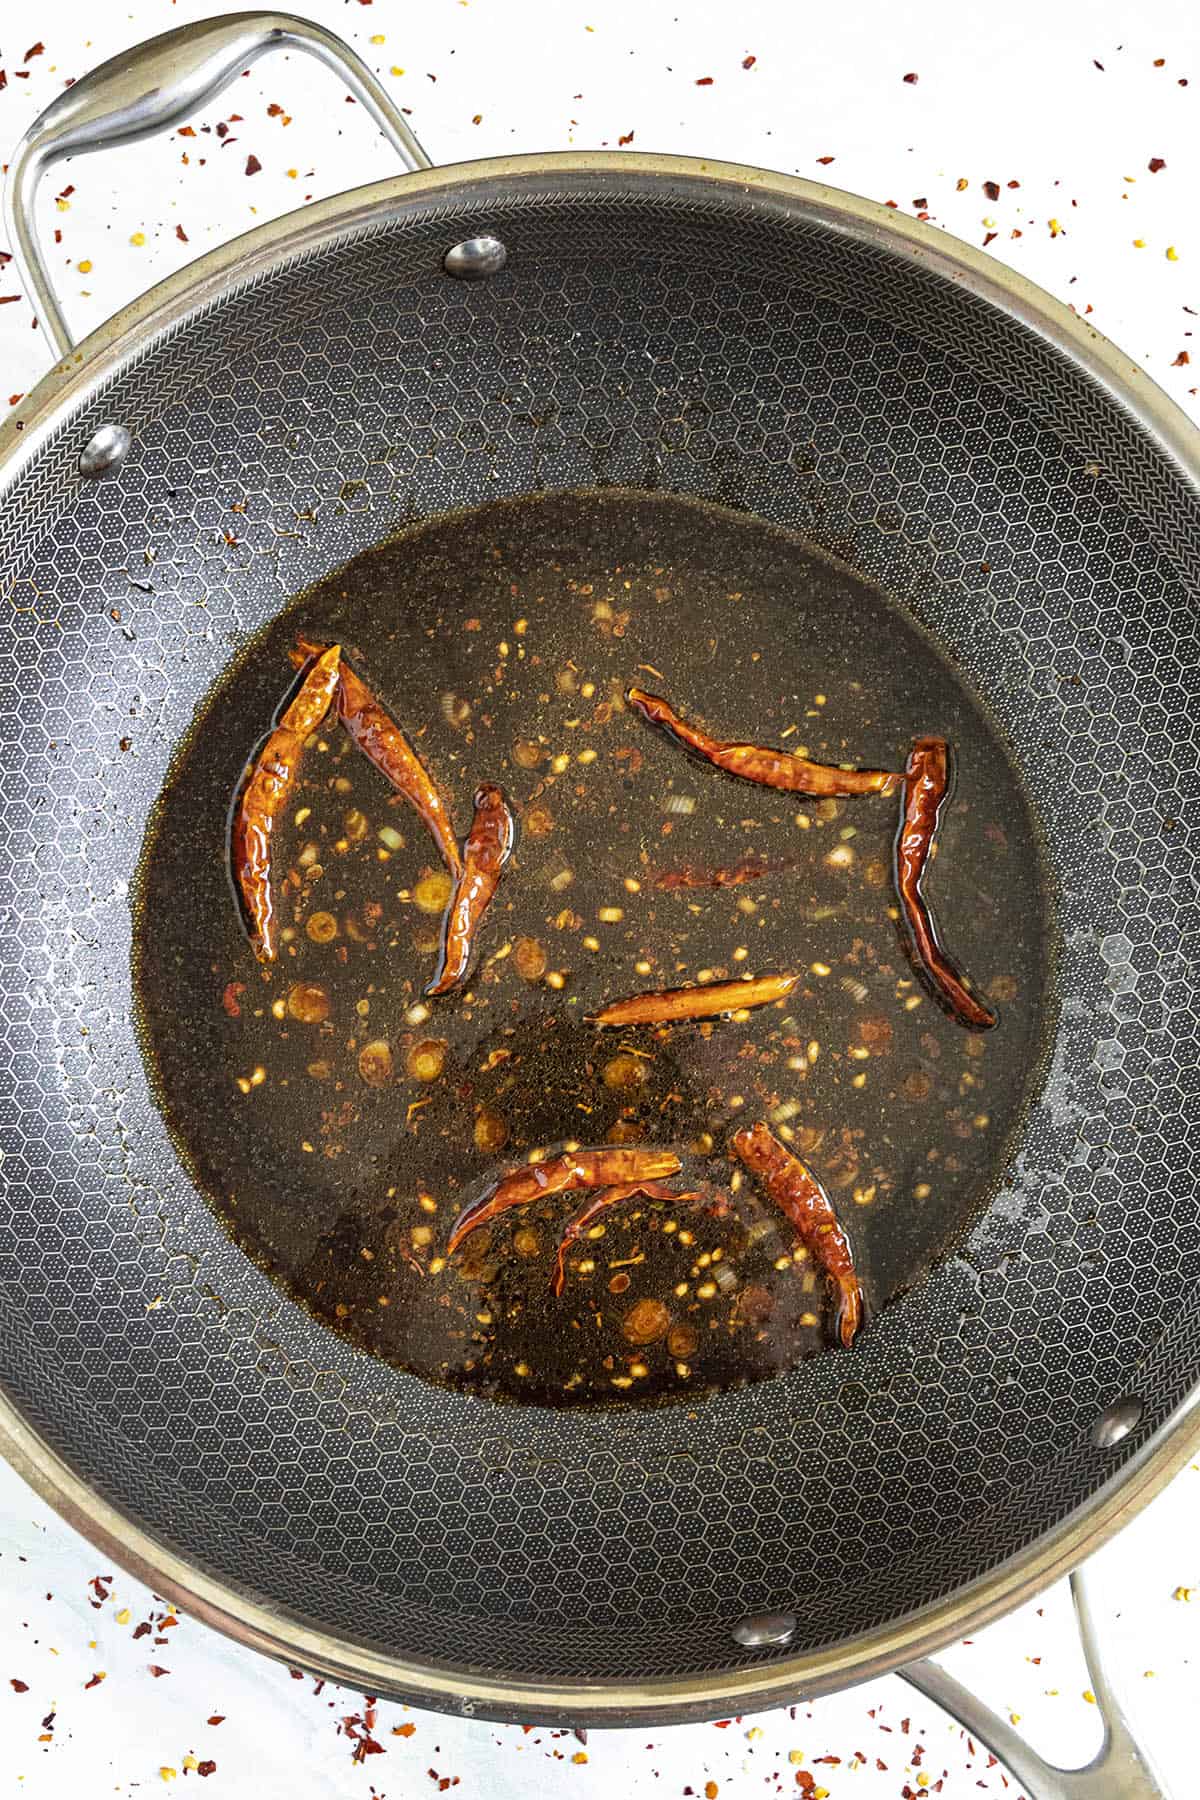 Simmering the Kung Pao Sauce in the hot pan